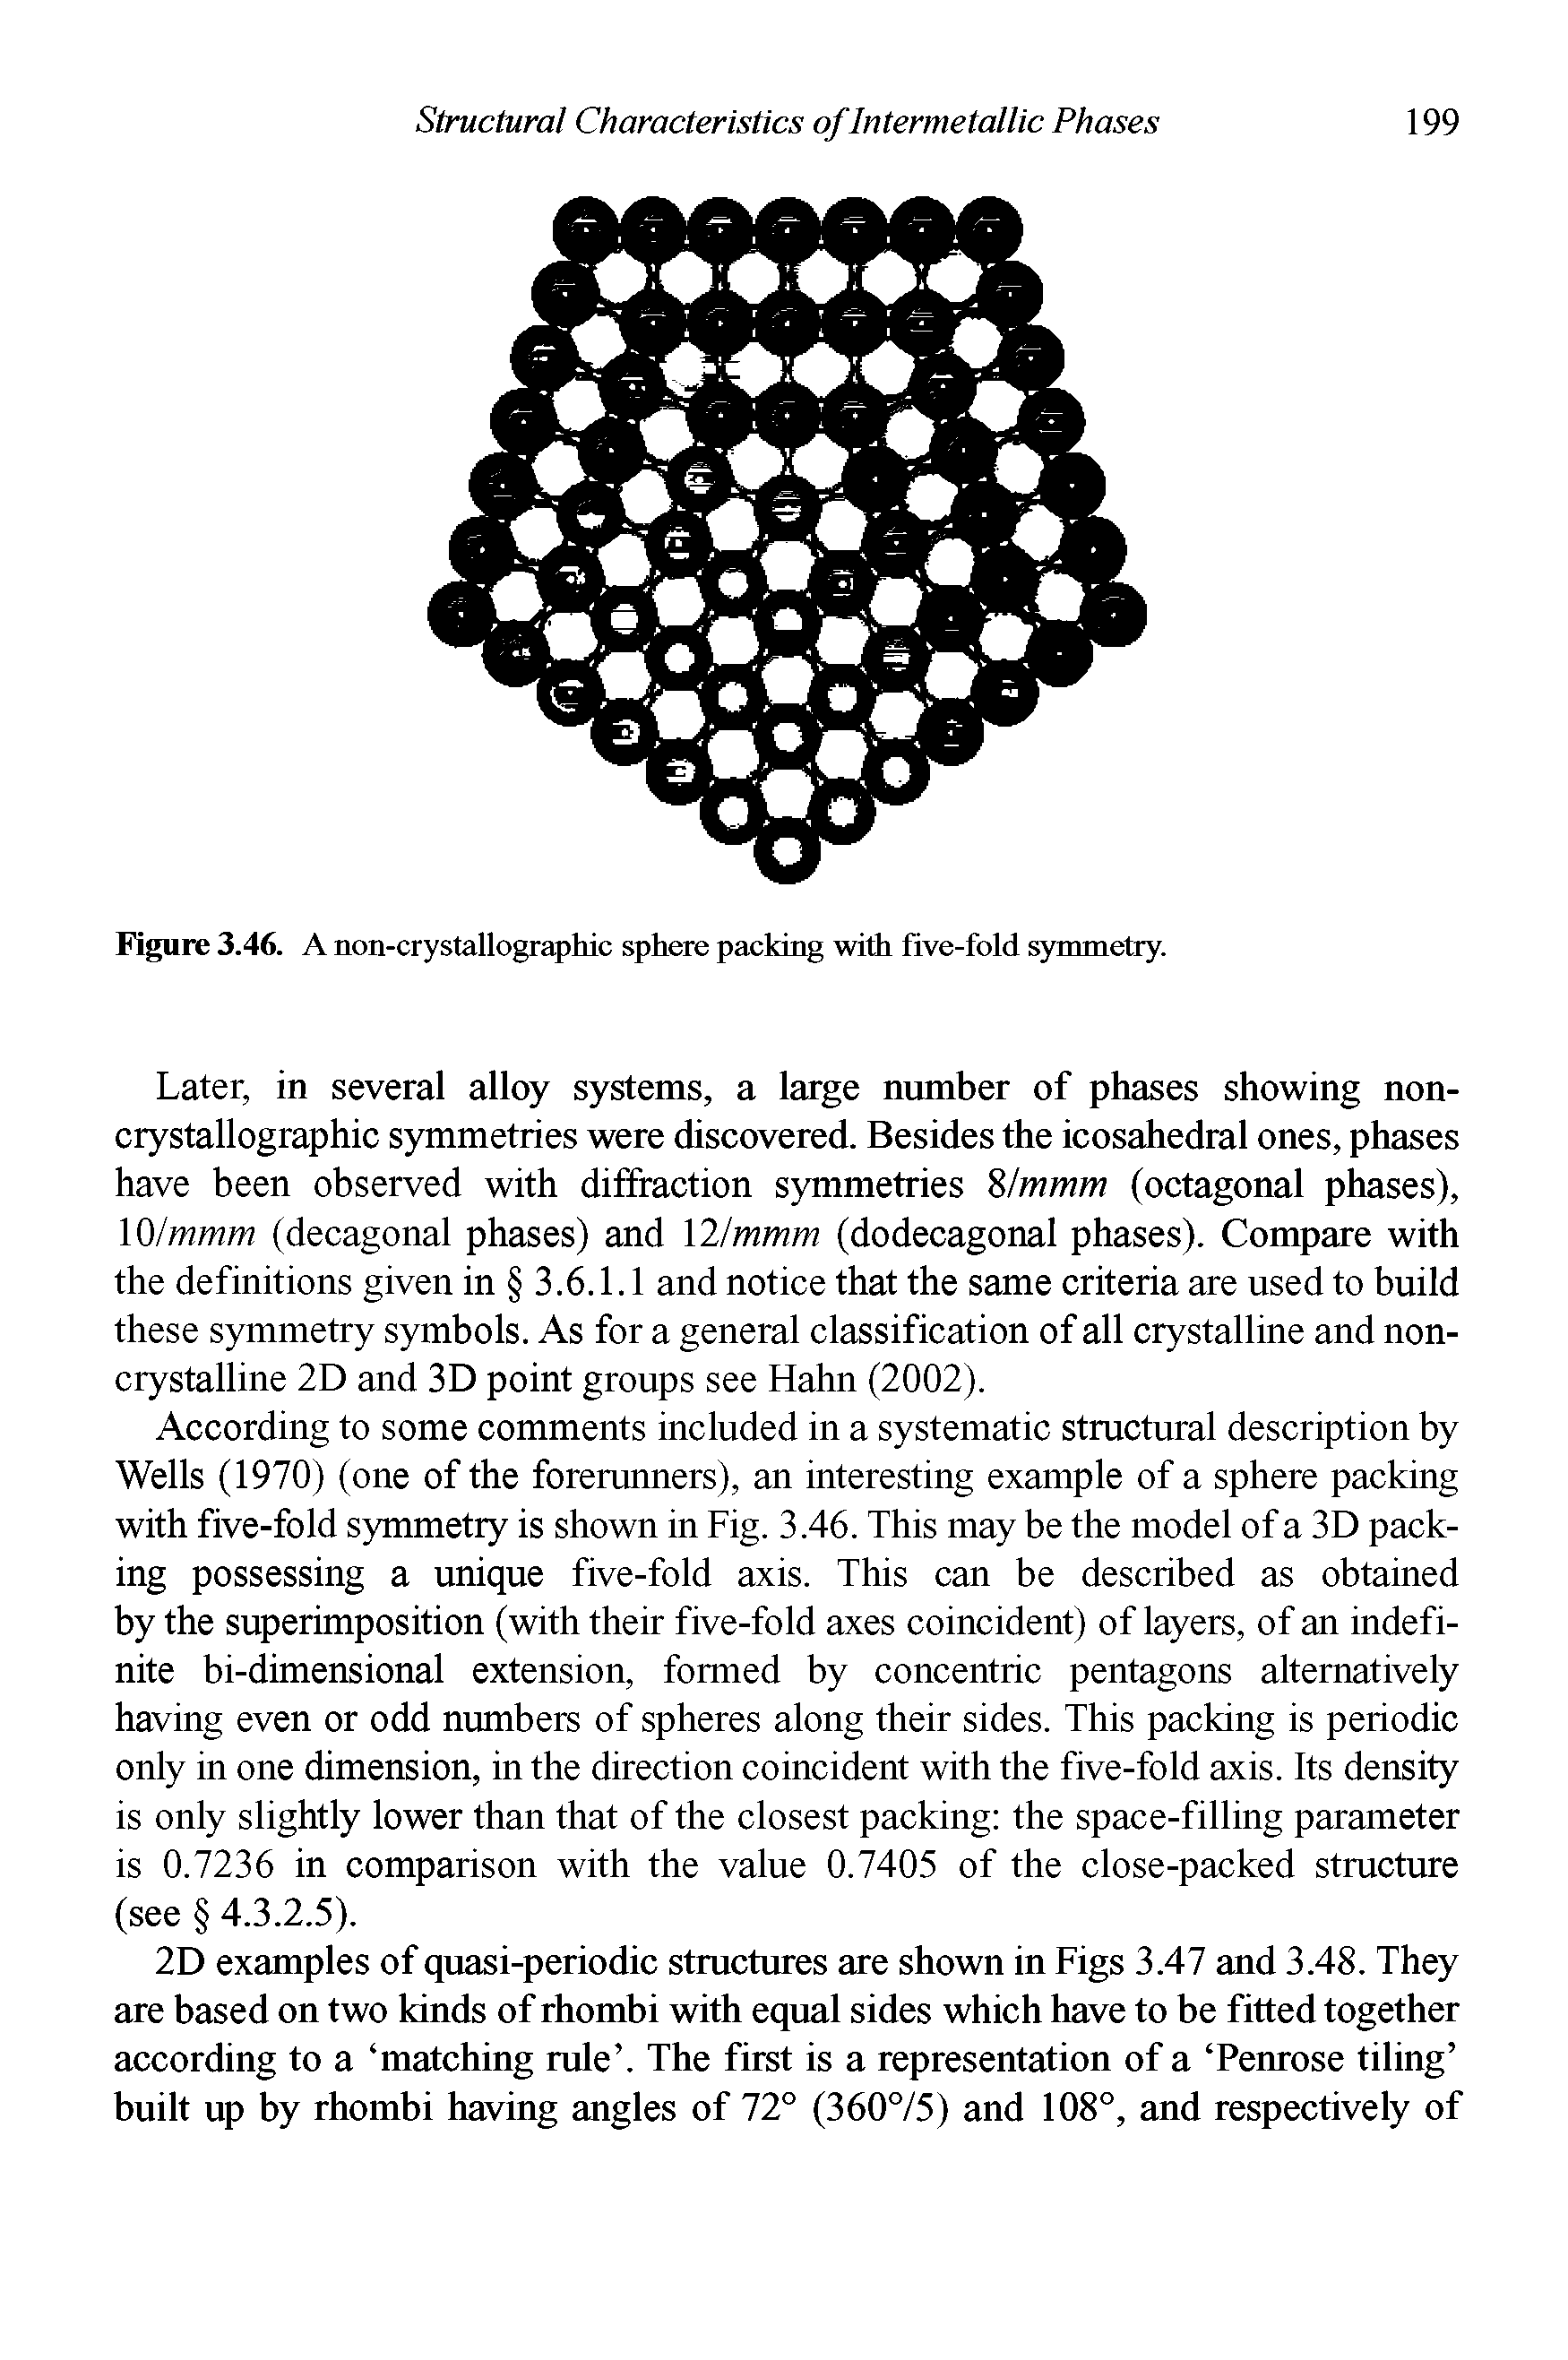 Figure 3.46. A non-crystallographic sphere packing with five-fold symmetry.